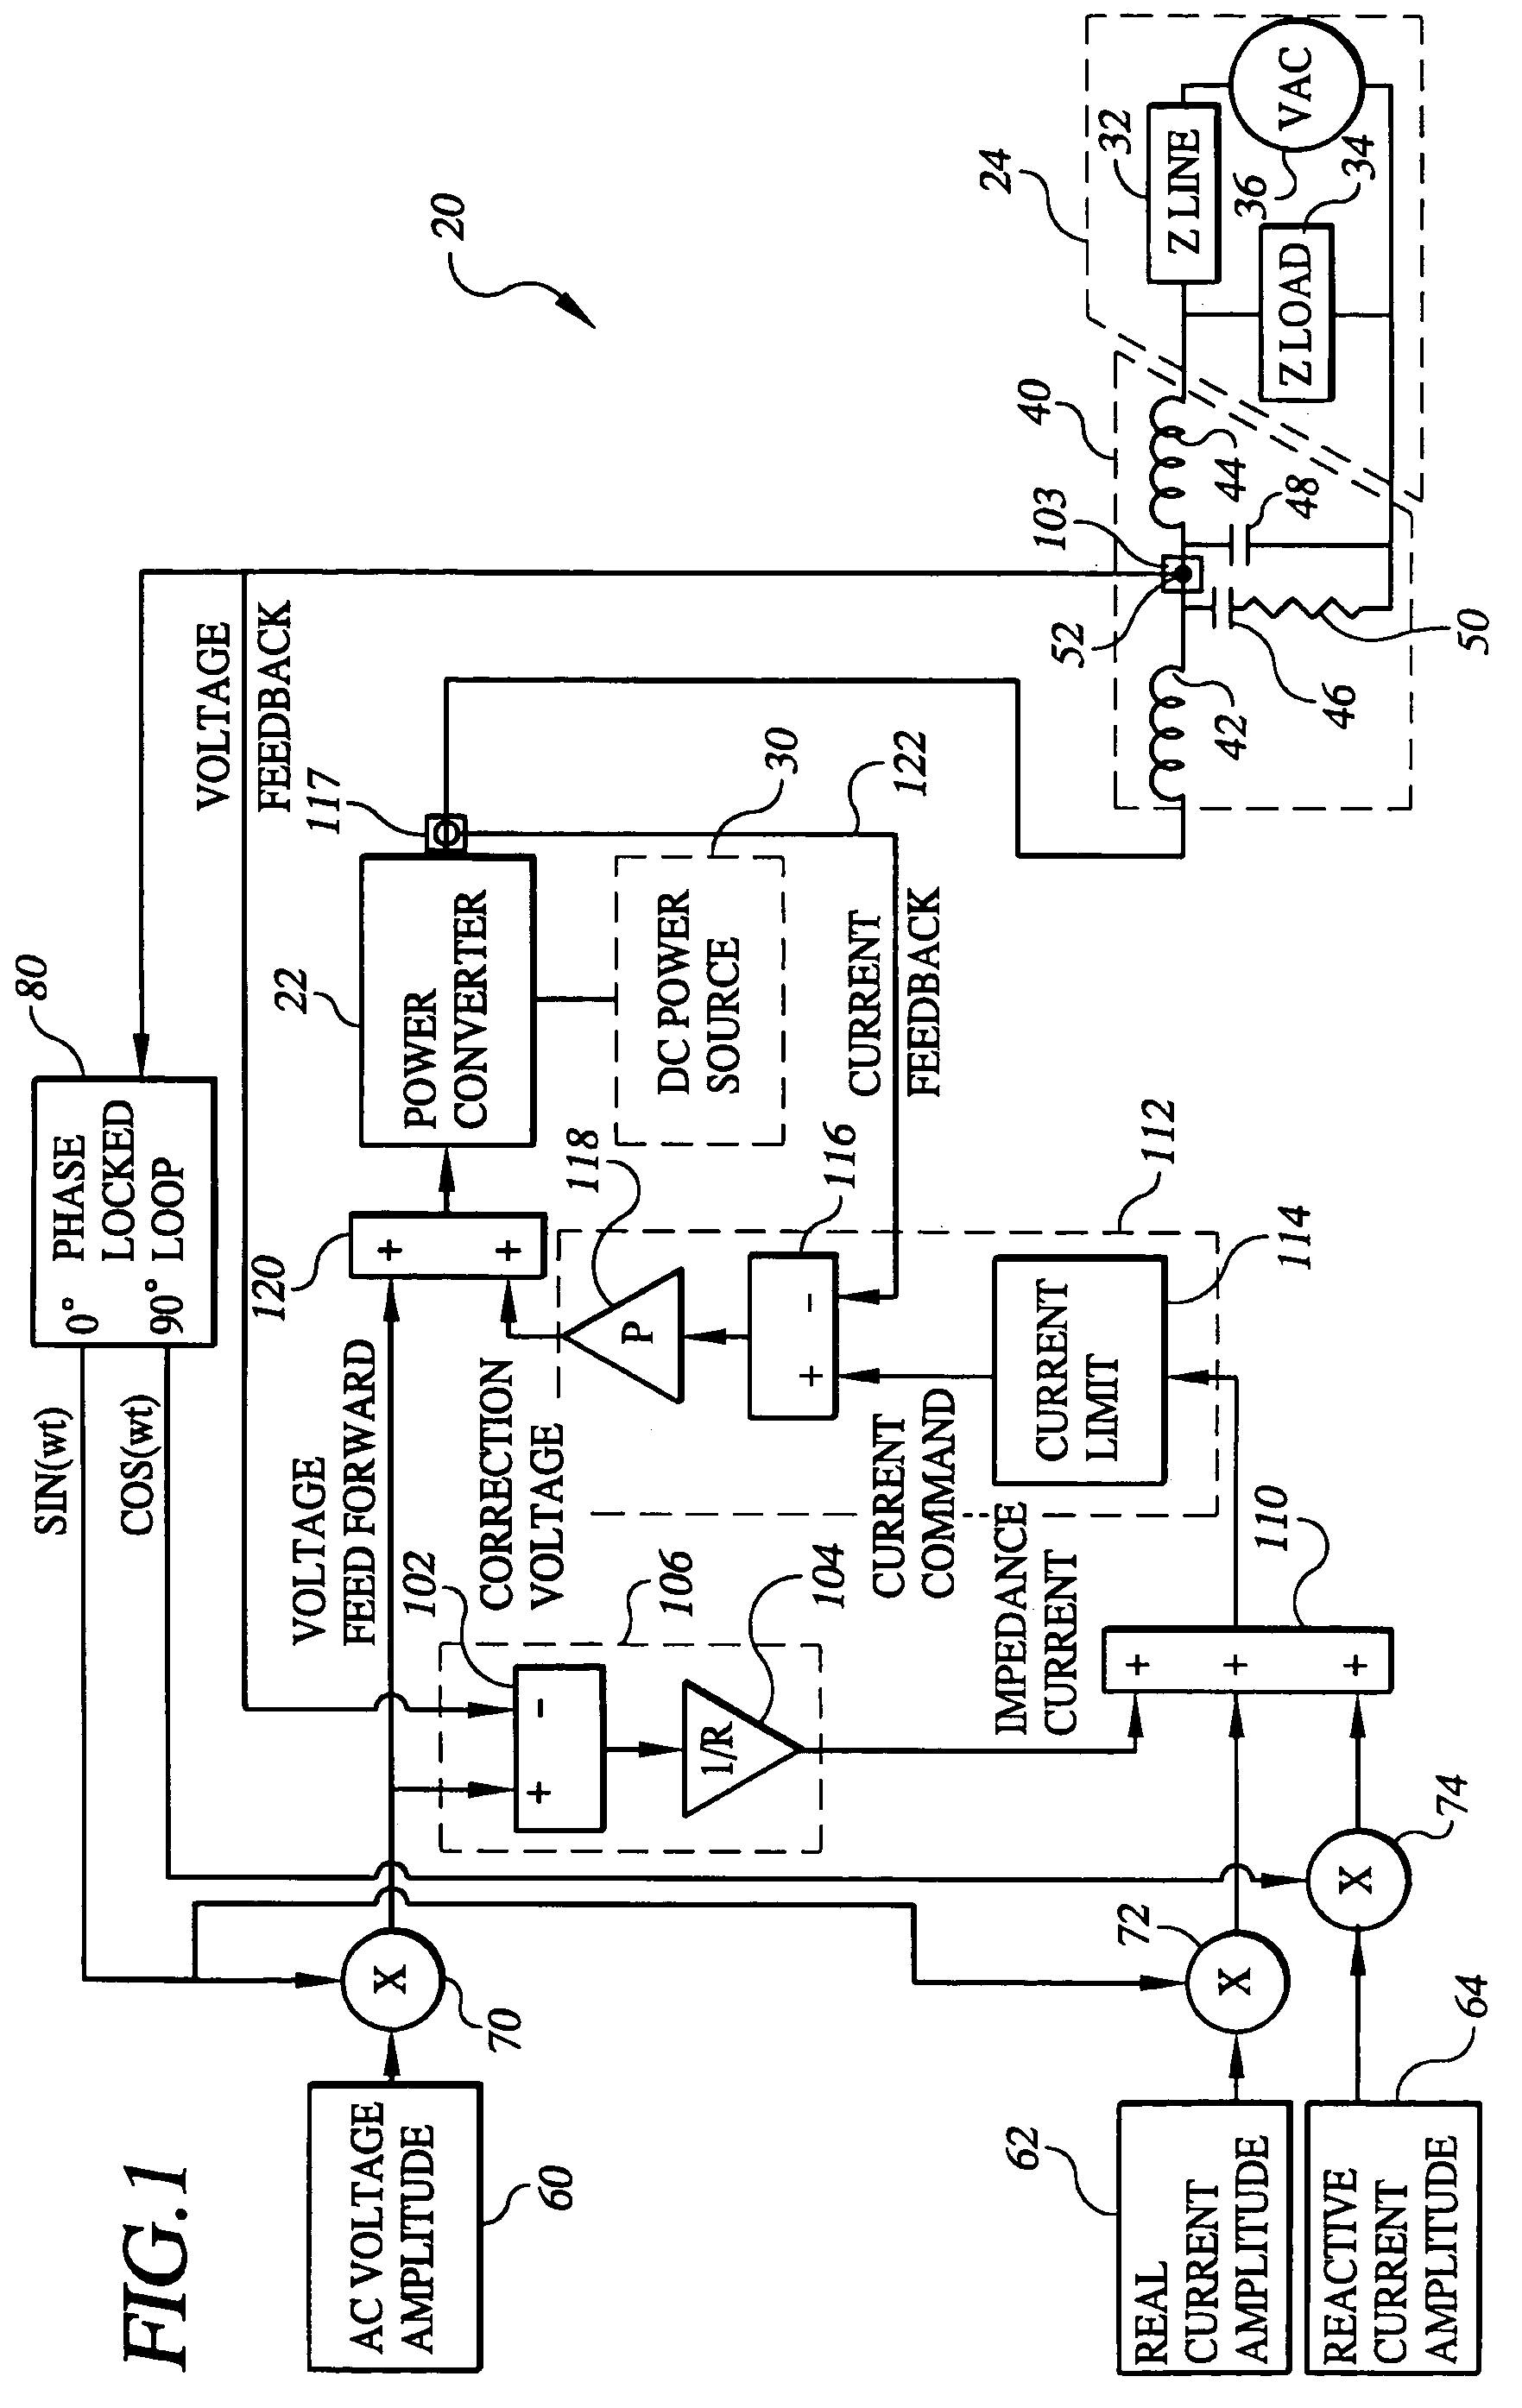 Parallel-connected inverters with separate controllers having impedance current regulators